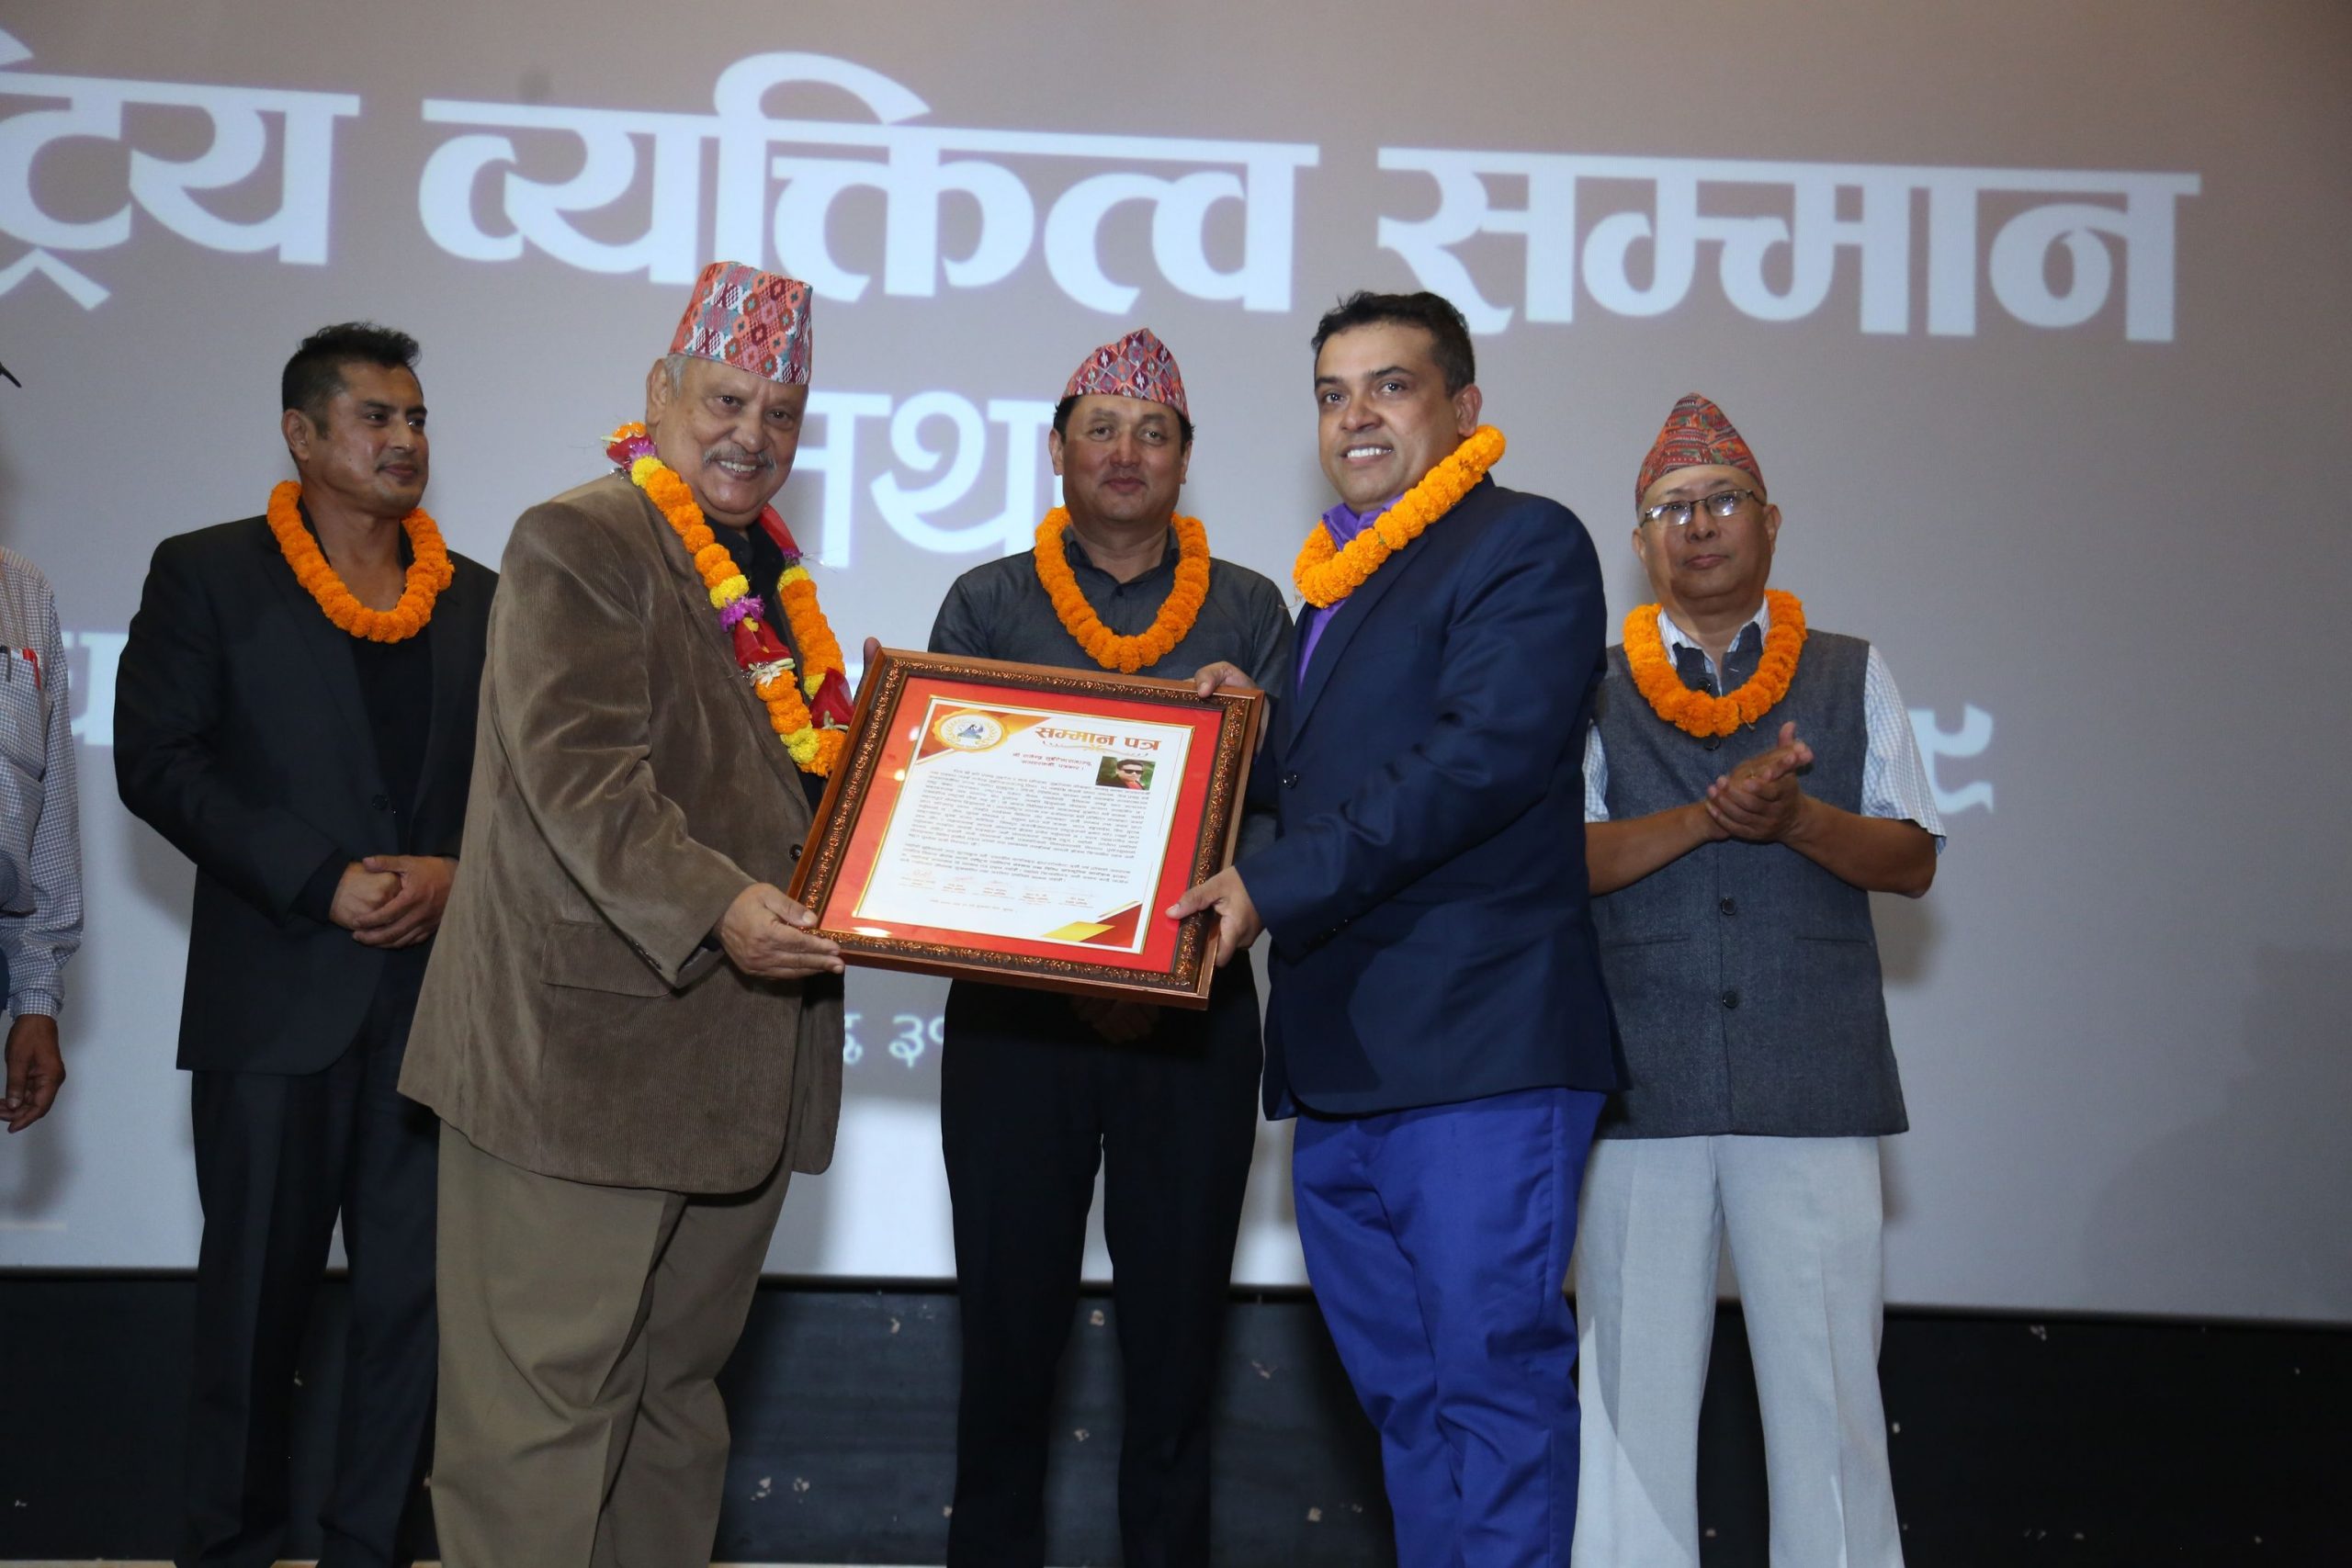 Journalist Rajendra Luitel (Raj) has been honored with the ‘National Personality Award